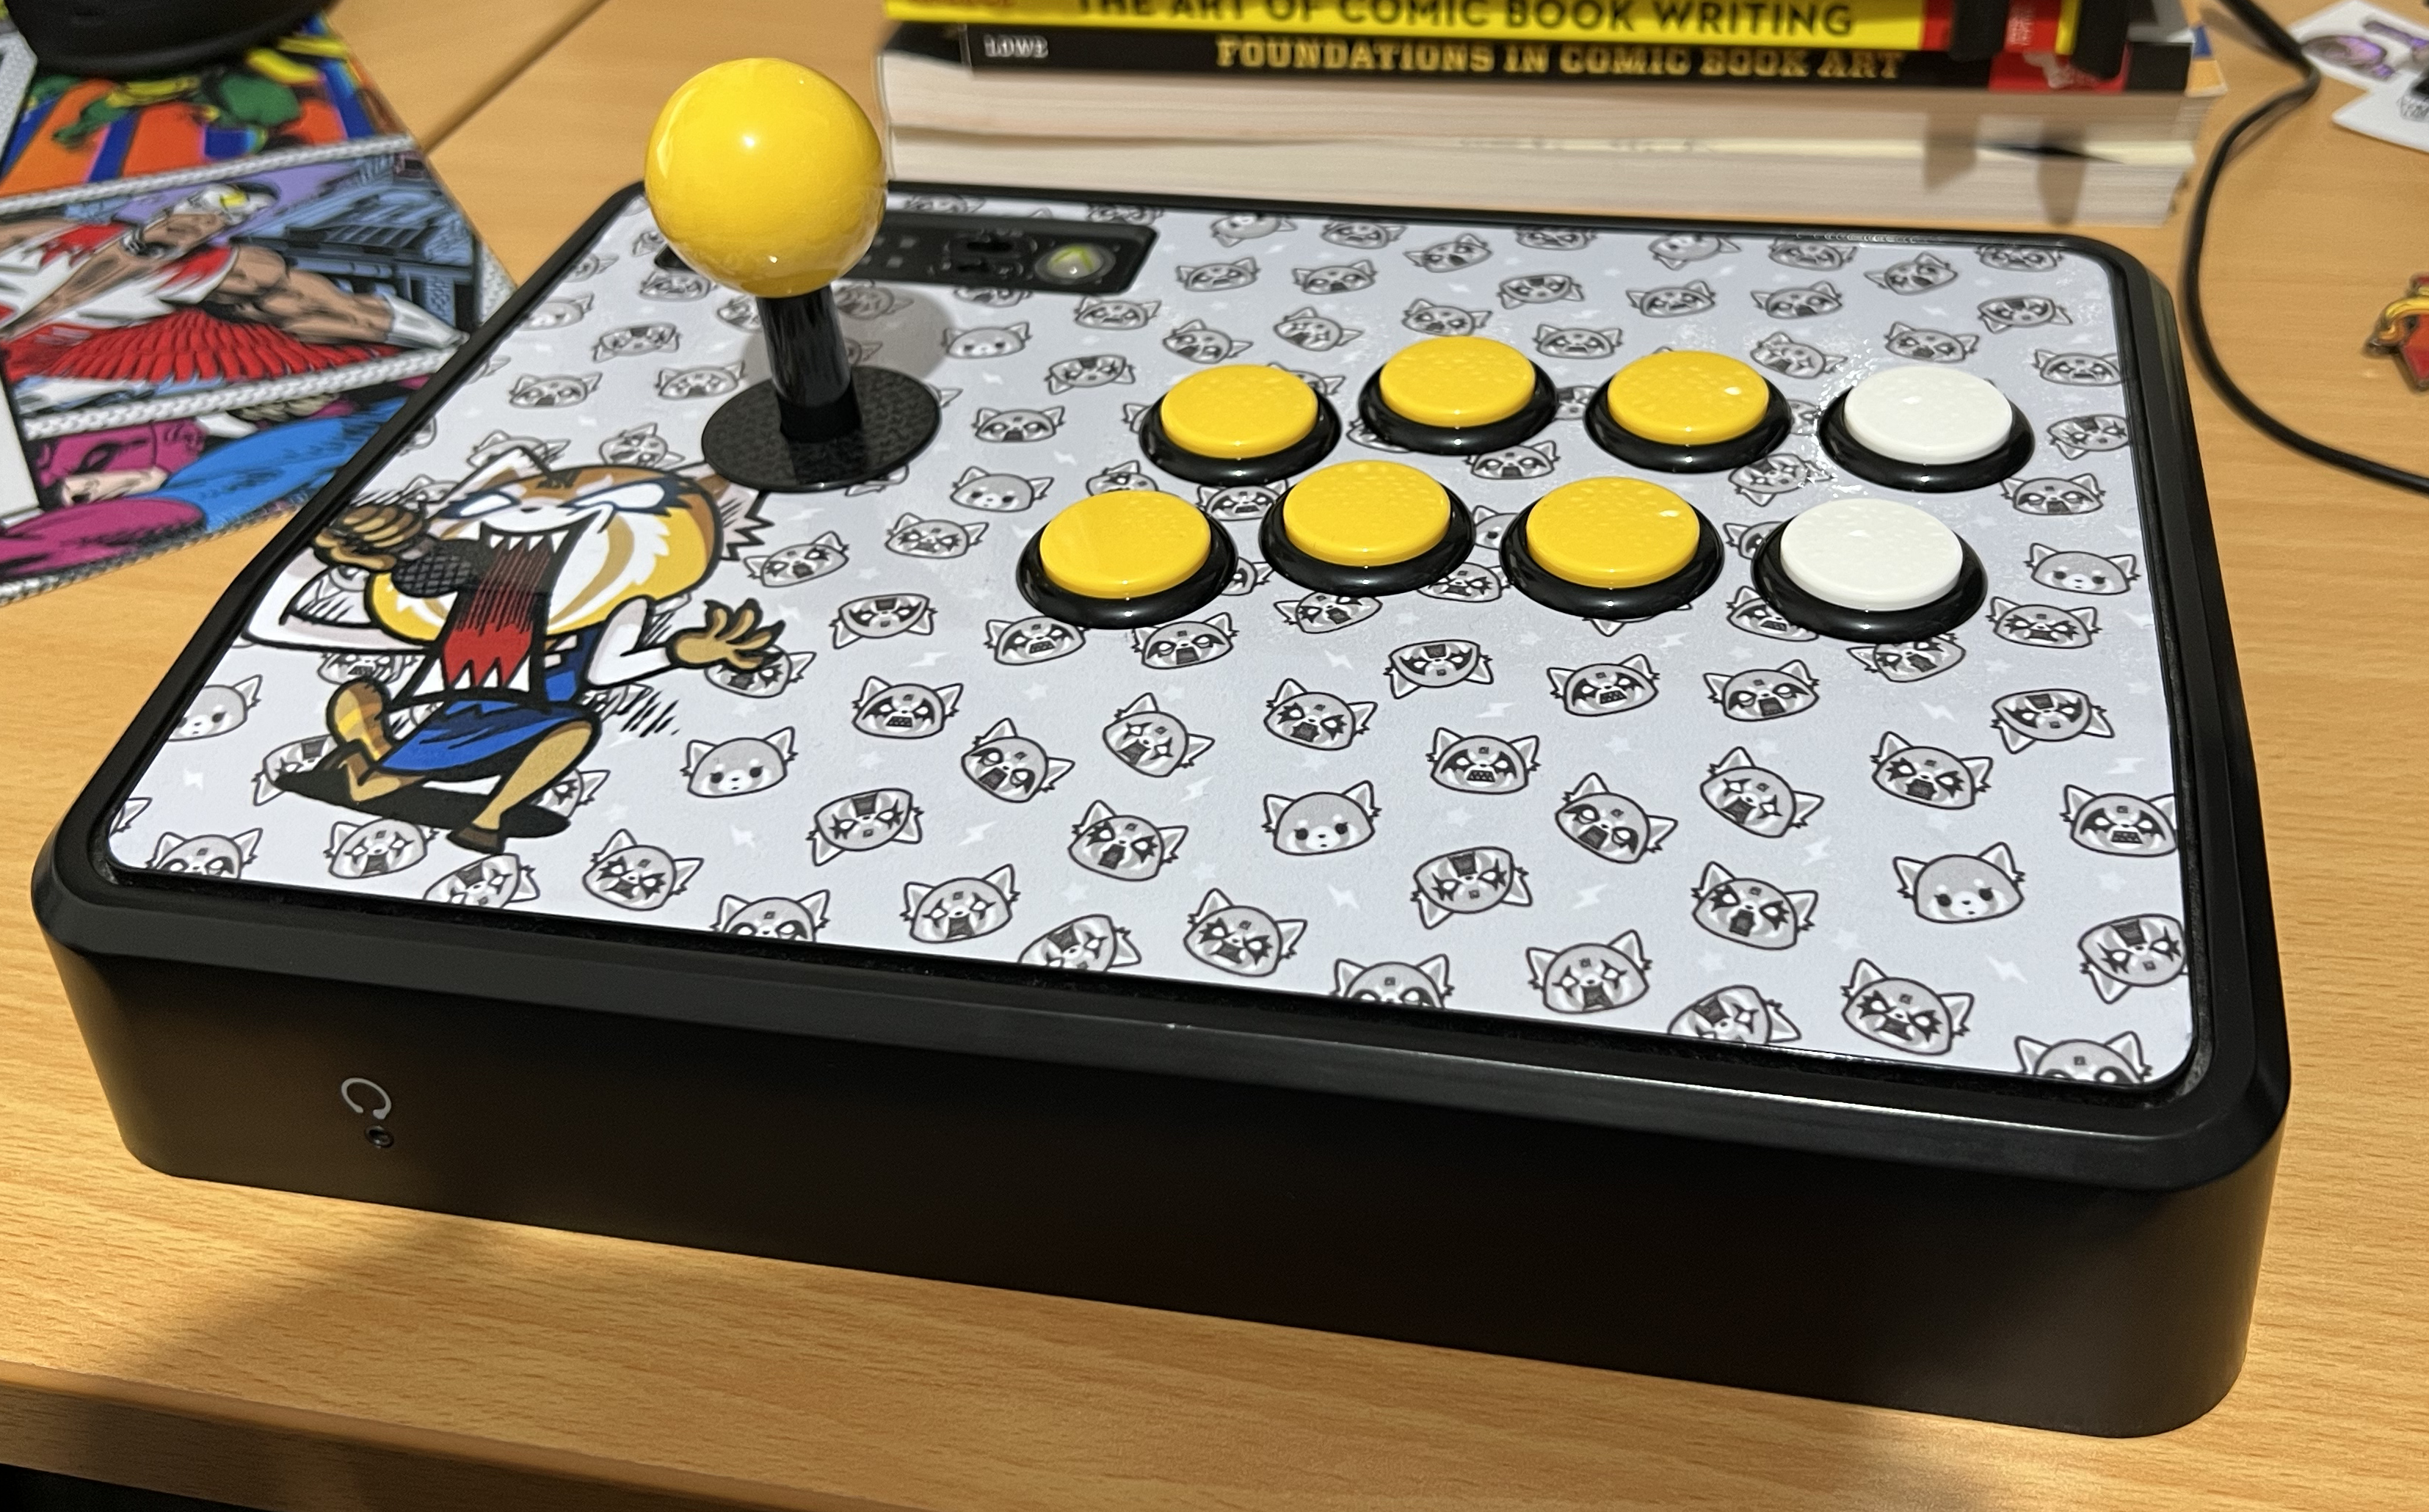 The finish fight stick with new art and matching buttons